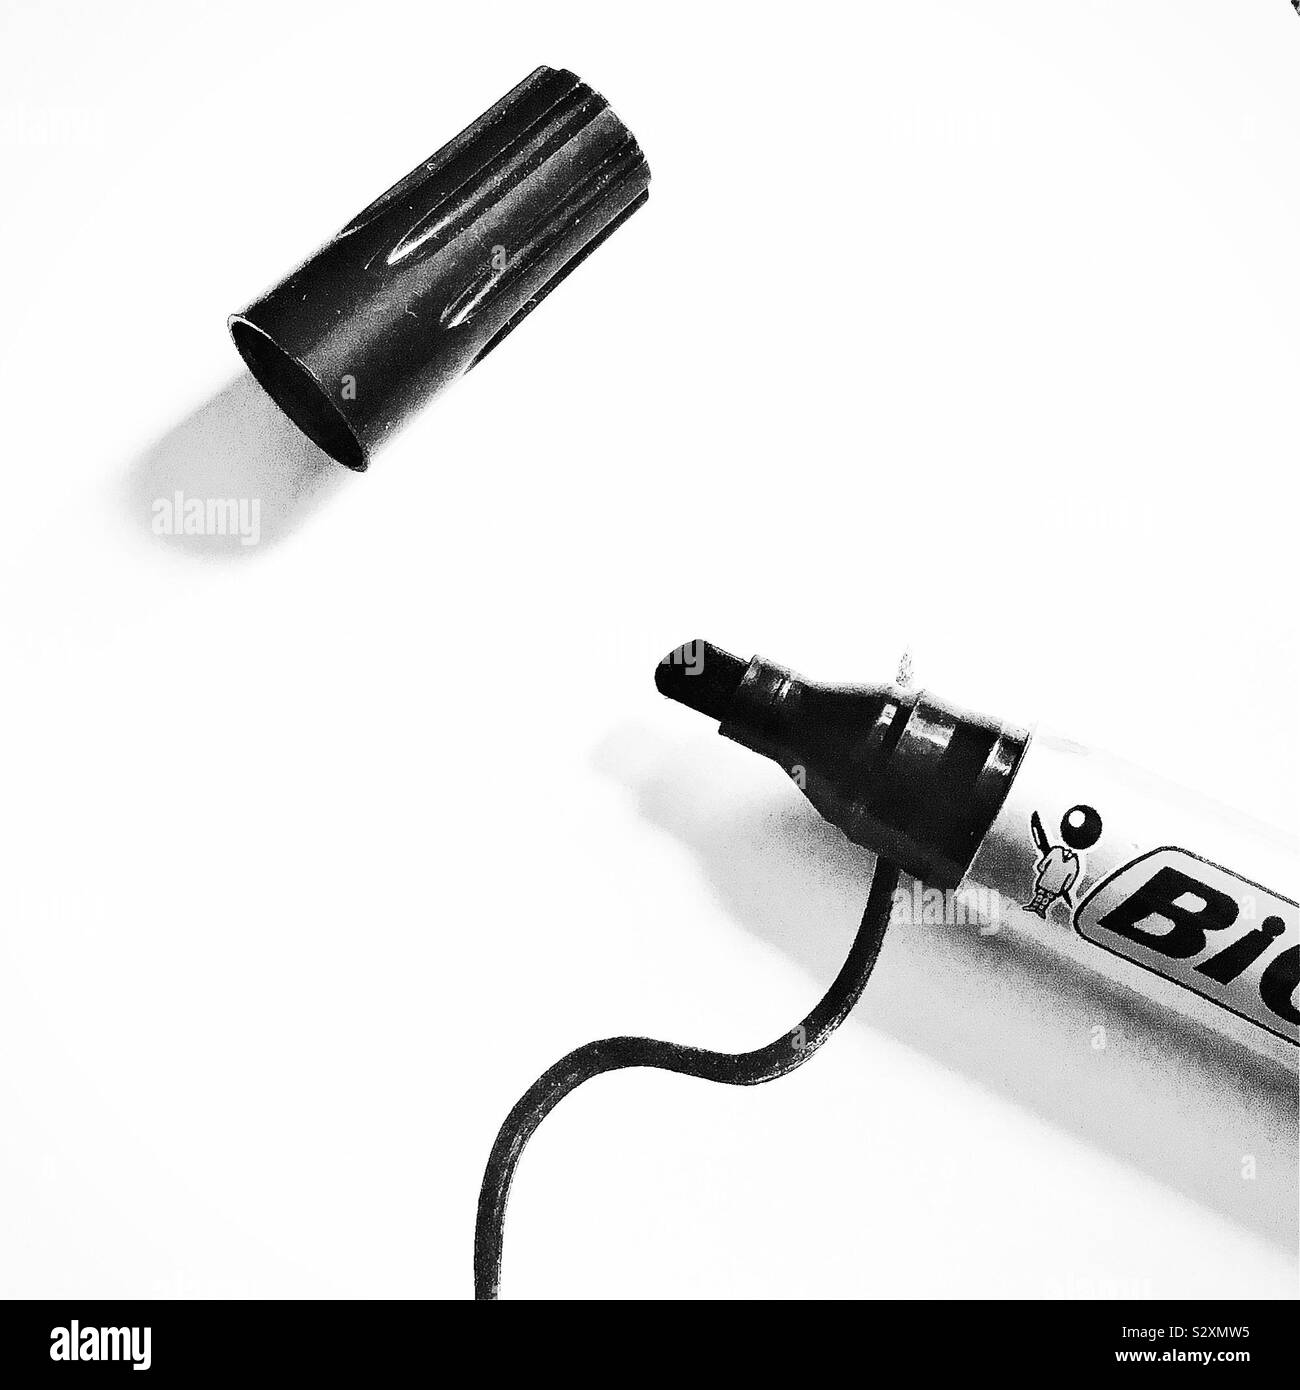 Permanent marker hi-res stock photography and images - Alamy